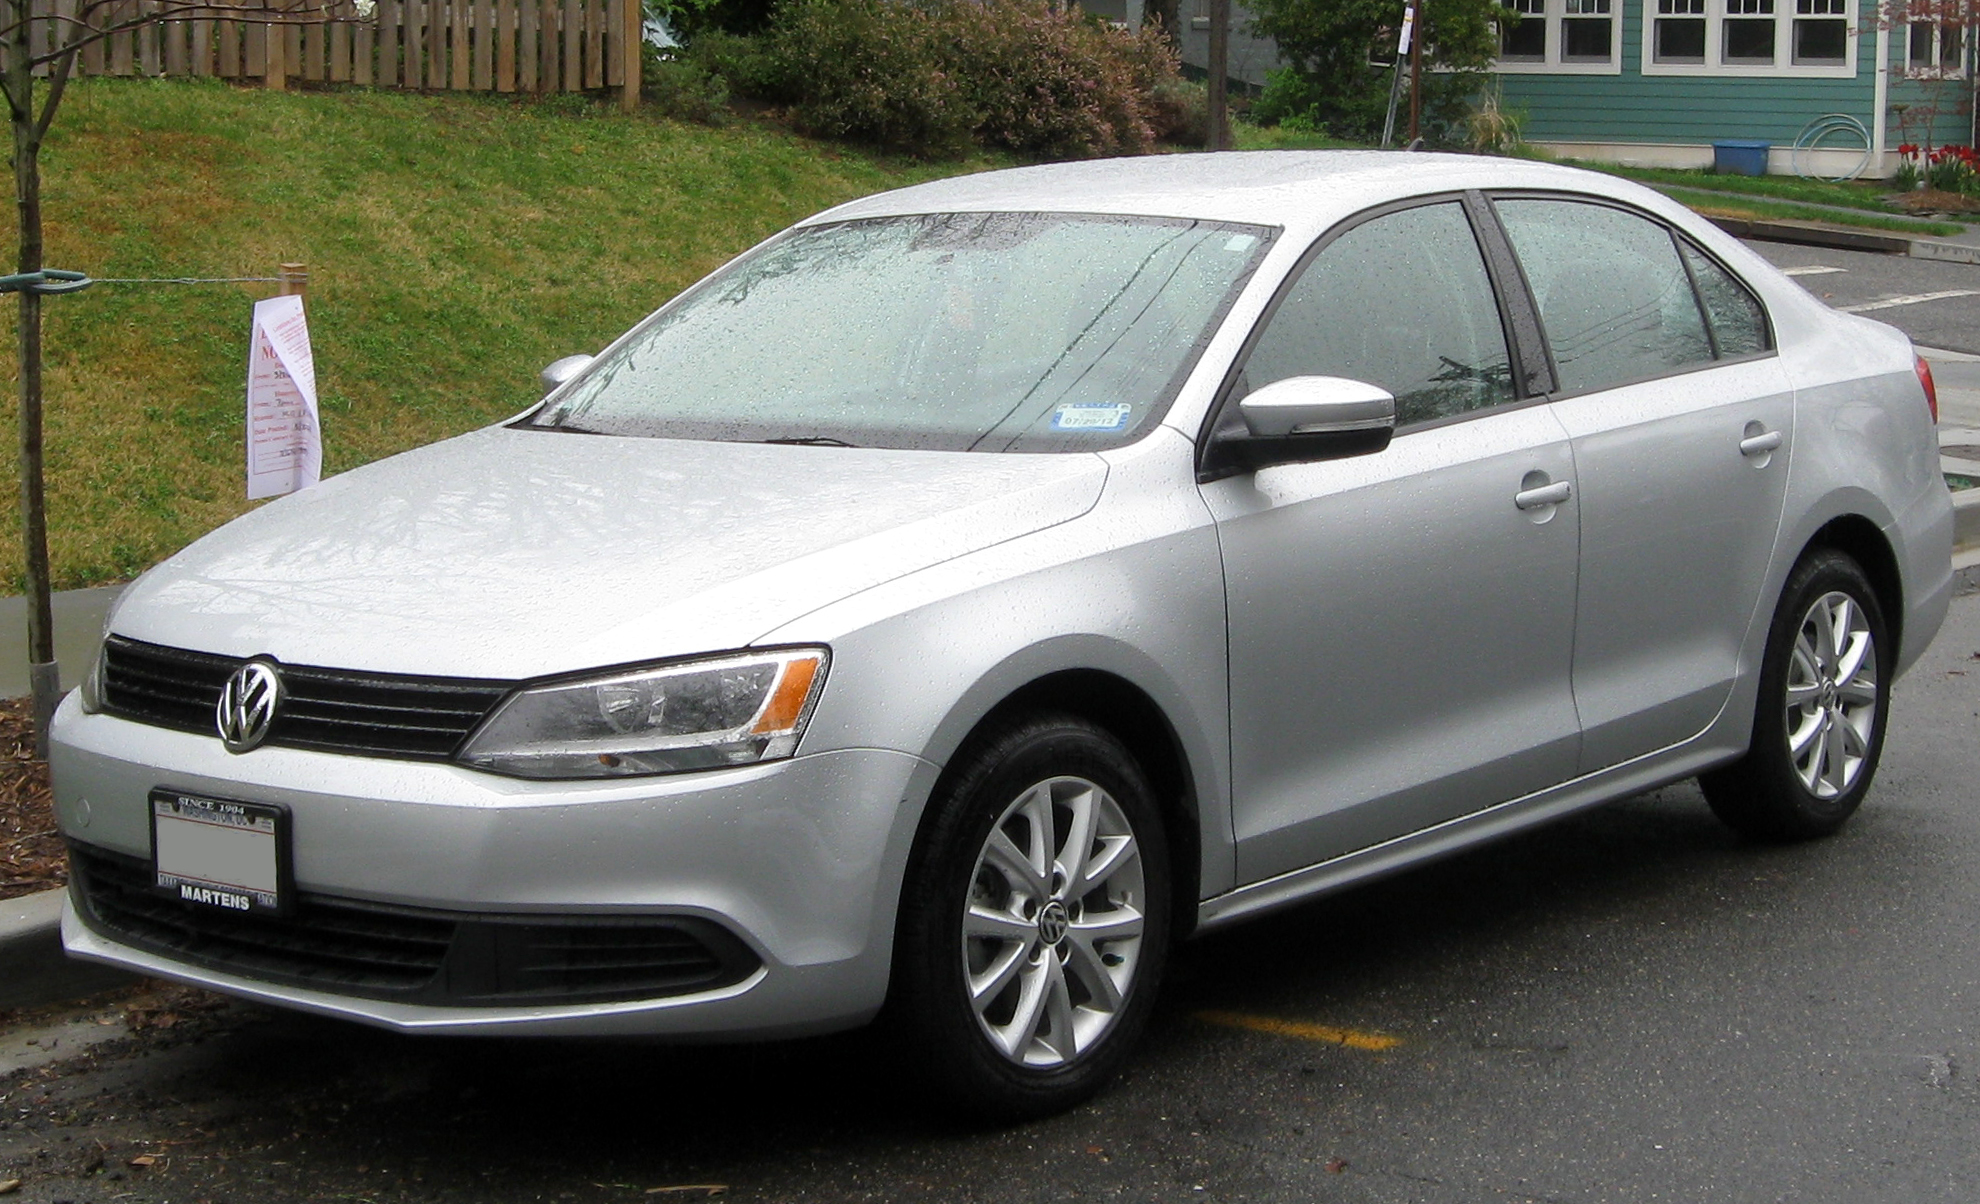 Volkswagen Jetta | The Truth About Cars